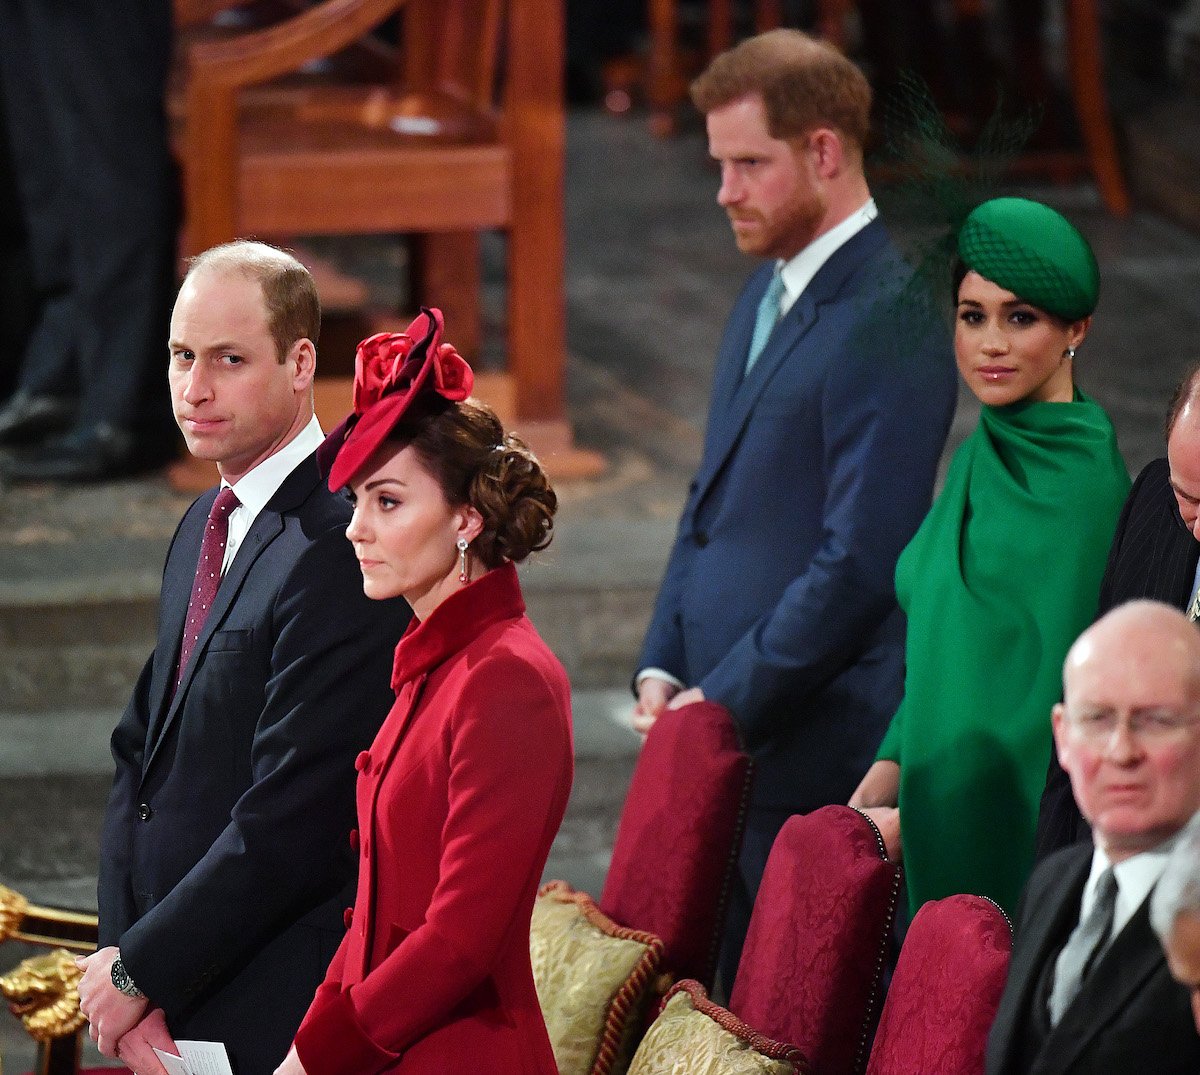 Prince William and Kate Middleton stand a row in front of Prince Harry and Meghan Markle at the 2020 Commonwealth Day service